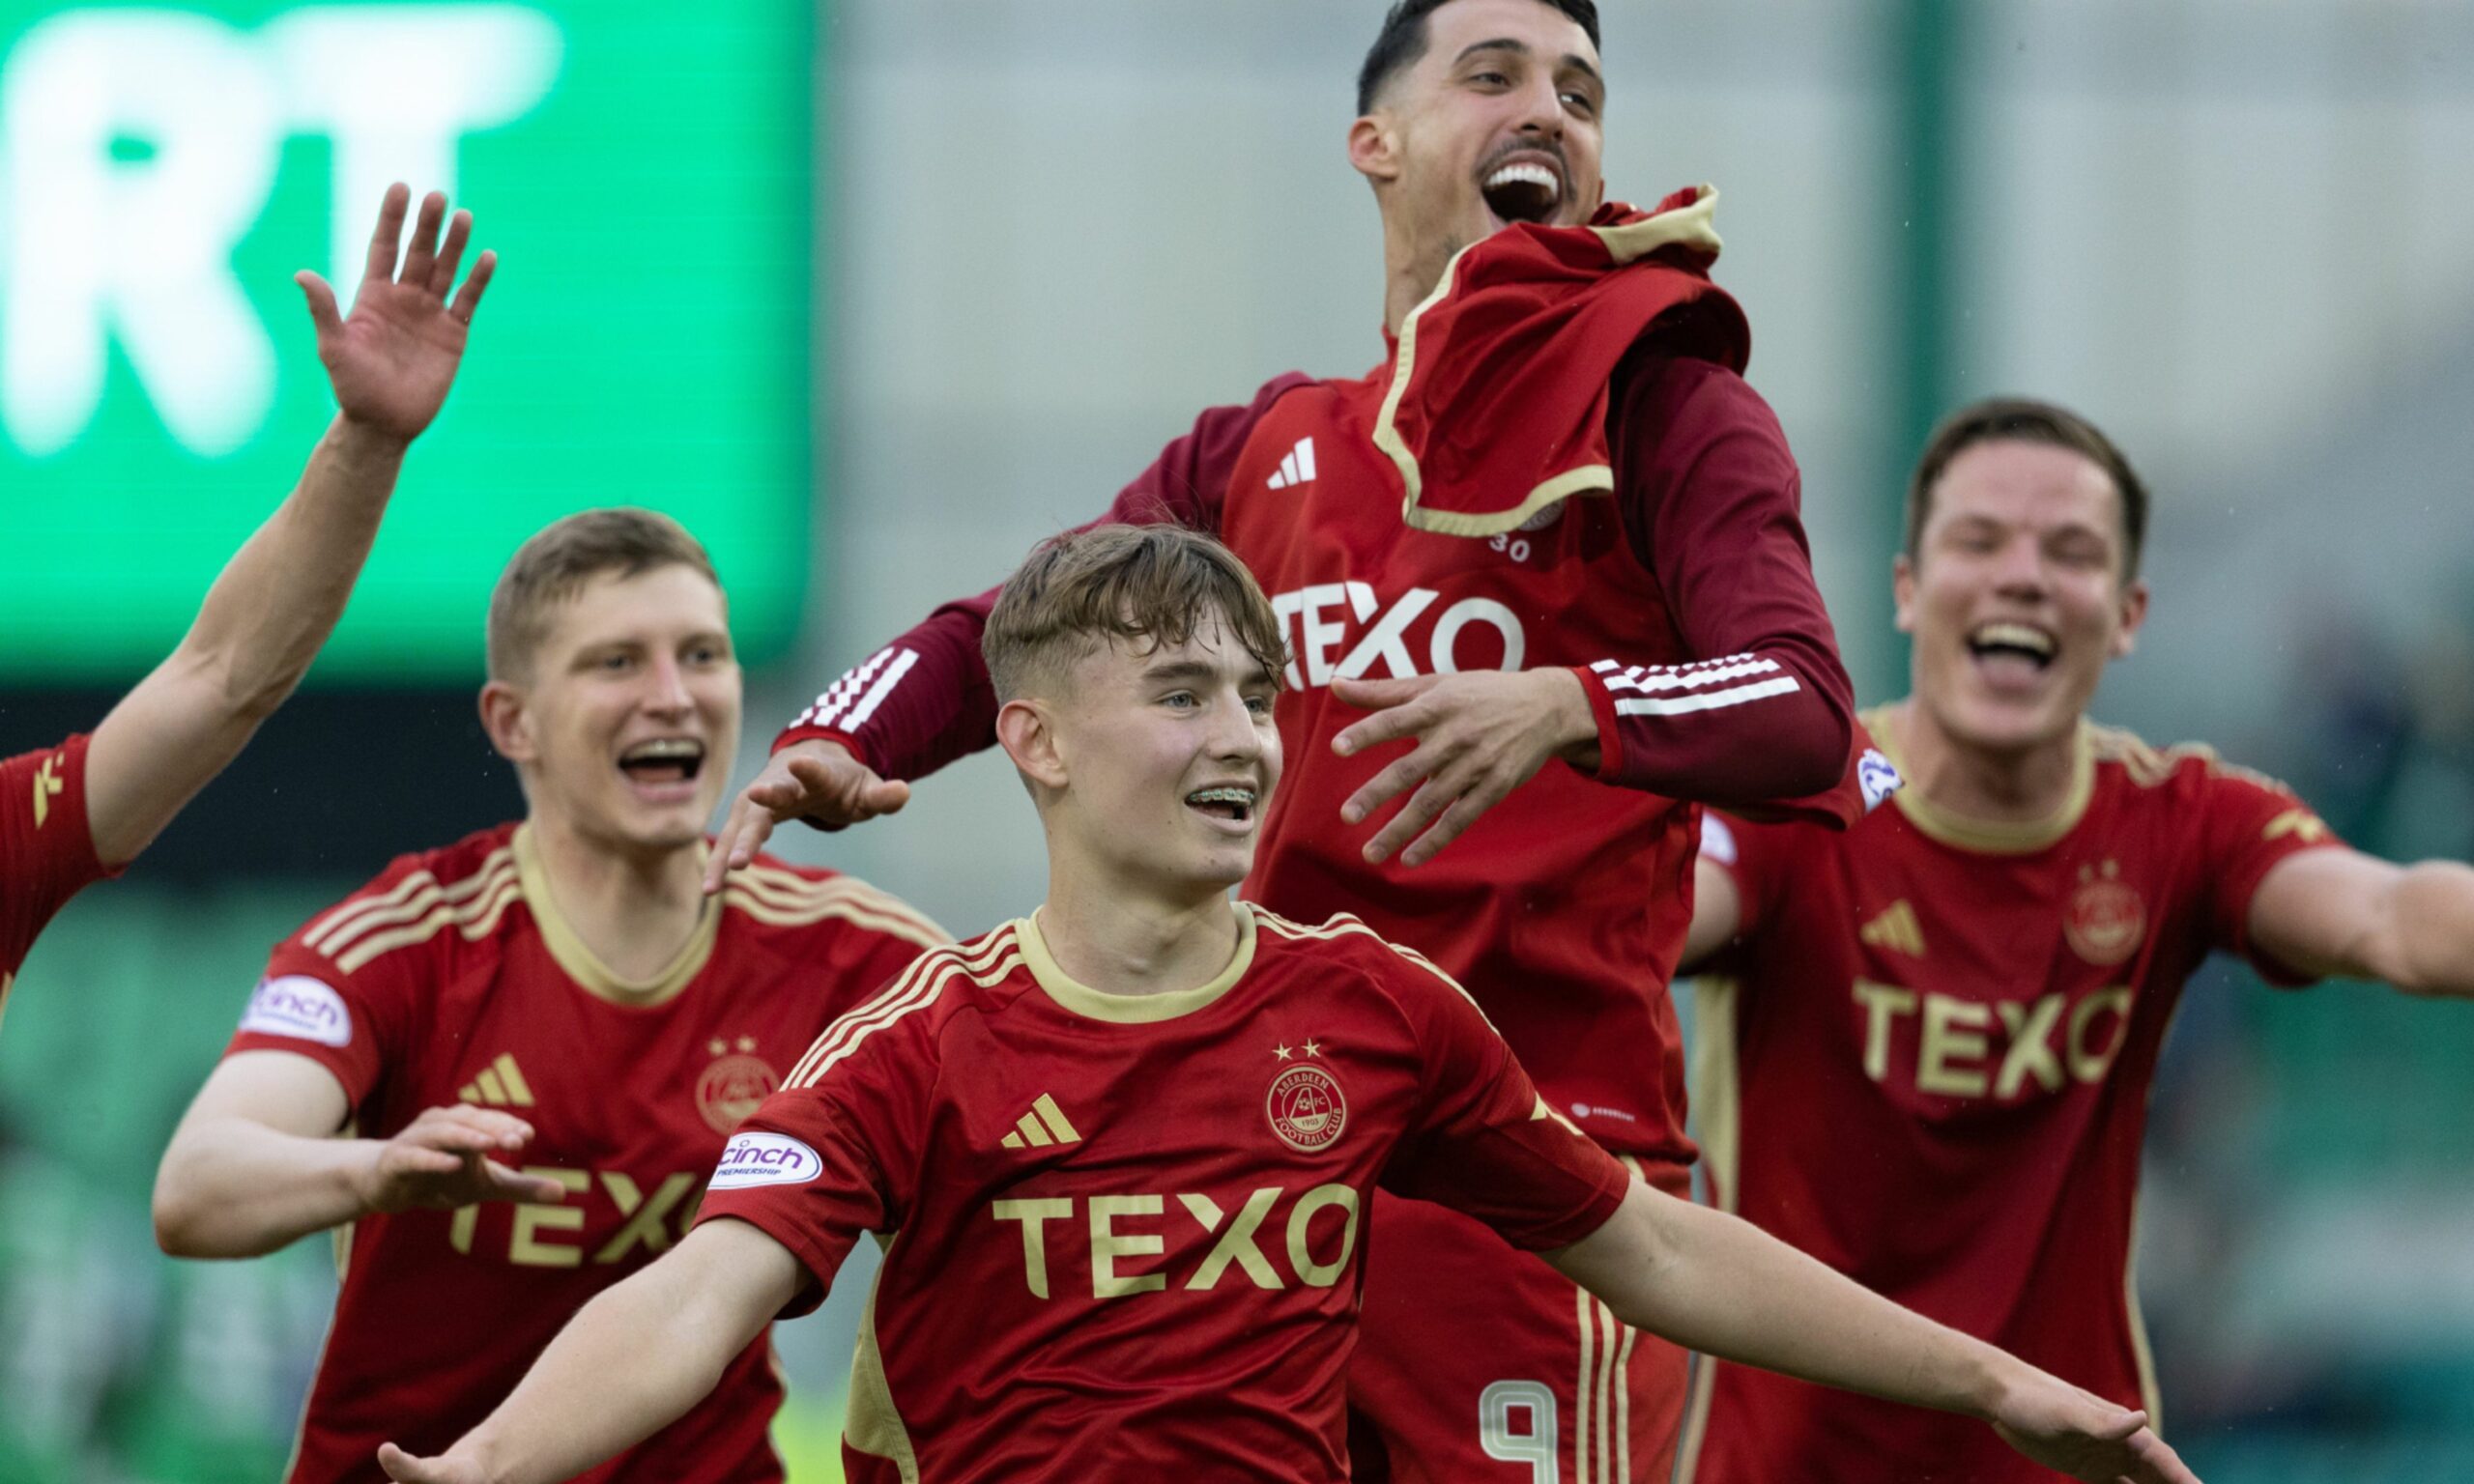 Aberdeen's Fletcher Boyd celebrates after scoring on his debut against Hibs. 